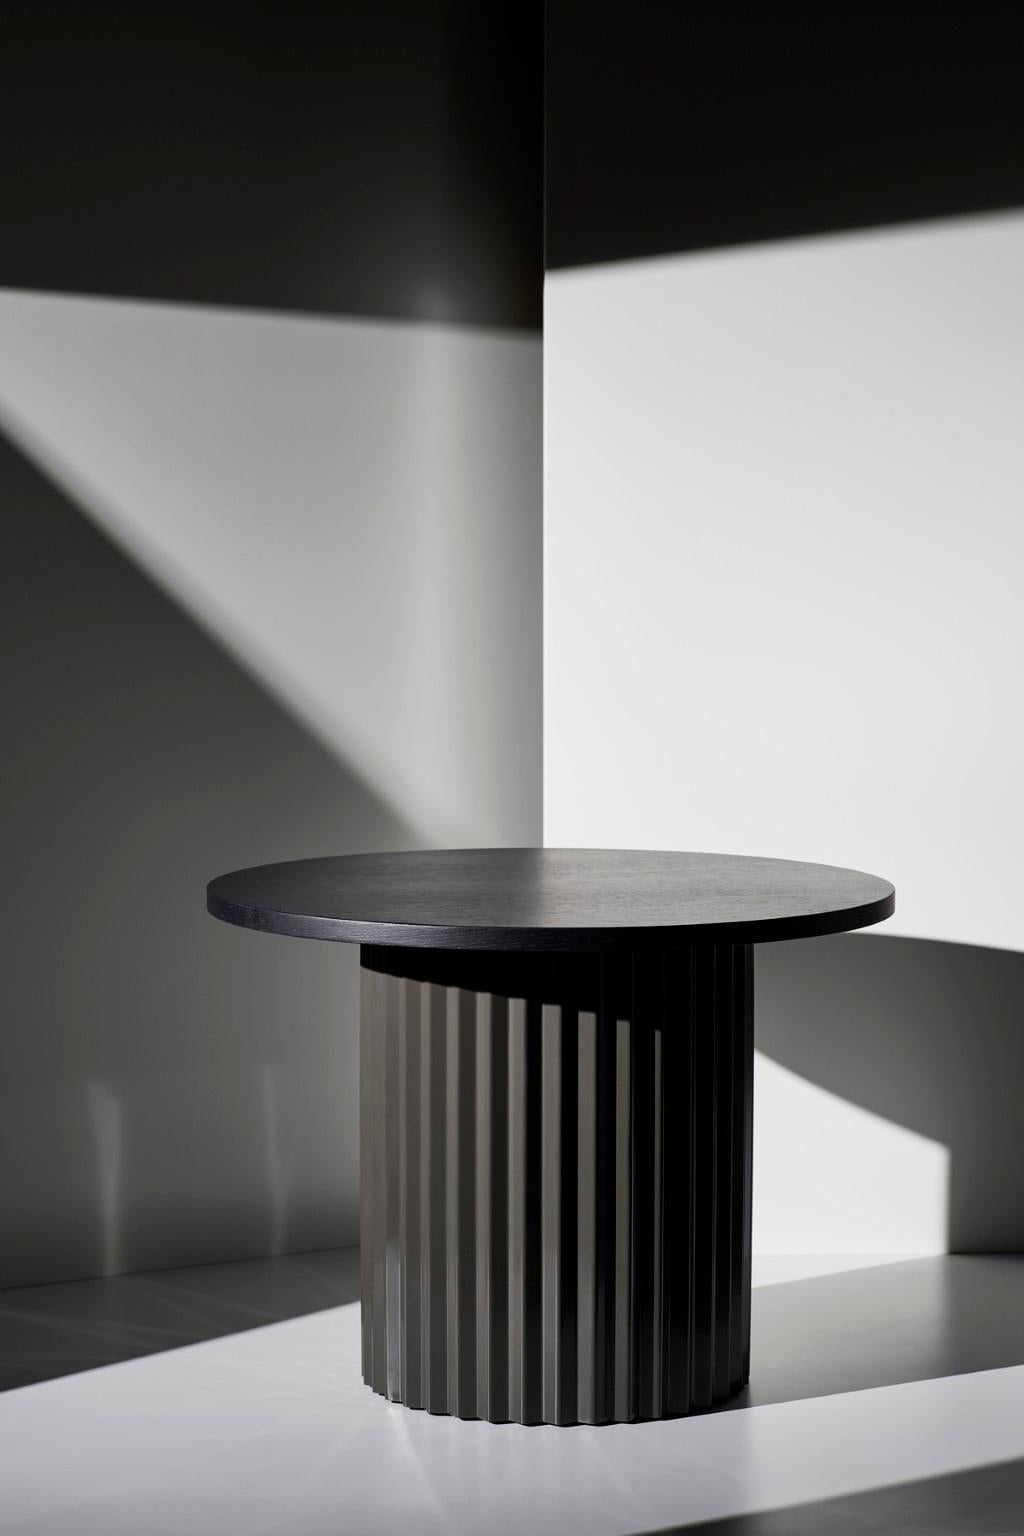 Set of 2 marble tables by Lisette Rützou
Dimensions:
D 40 x H 41 cm
Materials: Marble, oak tabletop, Brass Column


 Lisette Rützou’s design is motivated by an urge to articulate a story. Inspired by the beauty of materials, form and